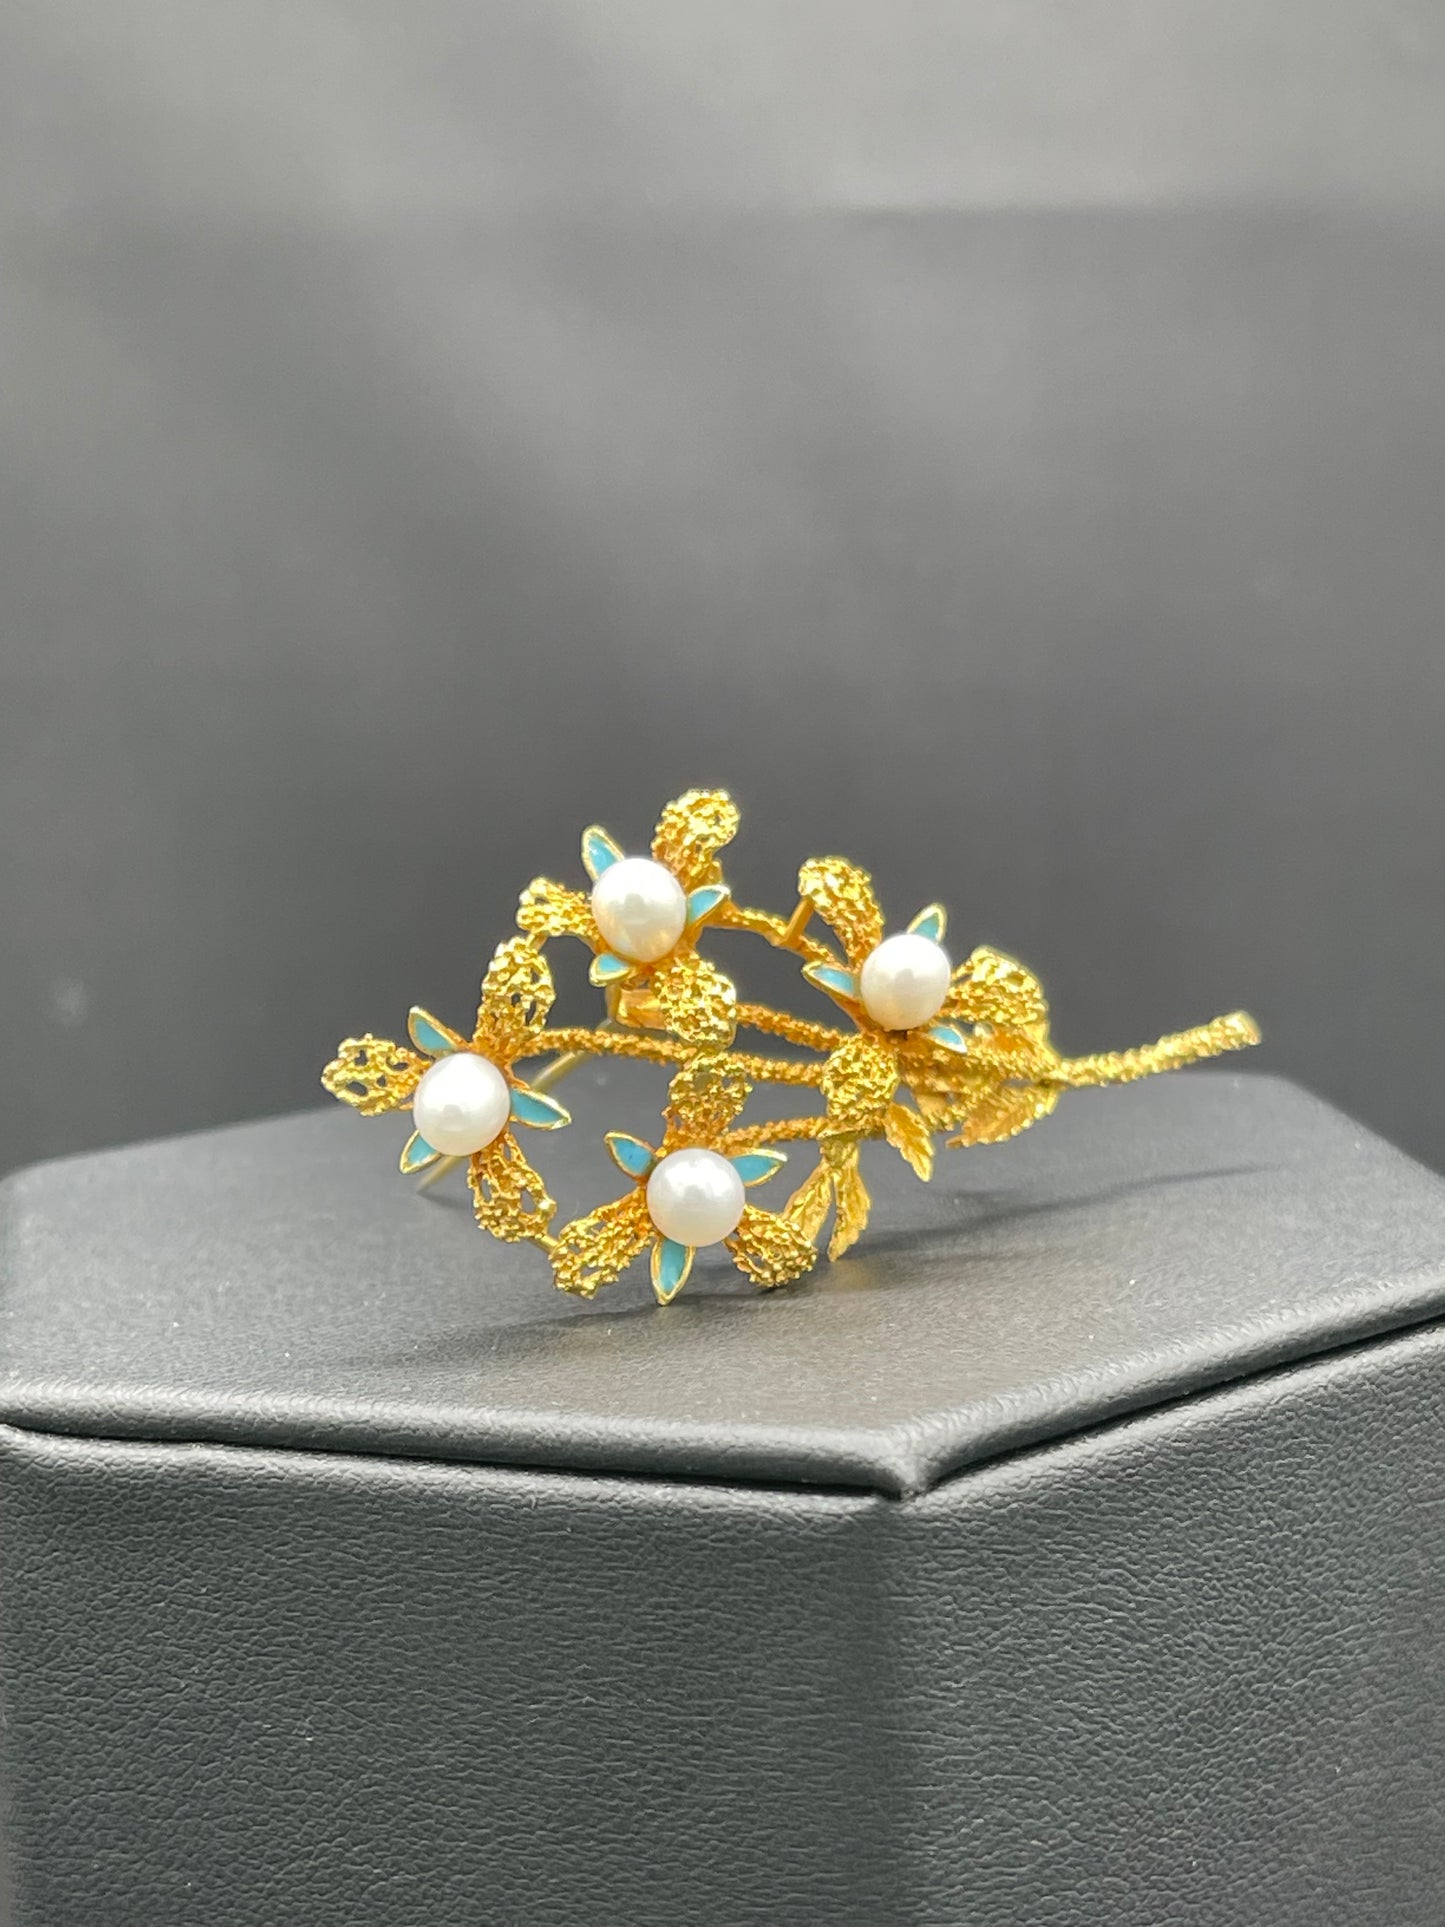 Vintage Freshwater Pearl & Turquoise 18k Yellow Gold Brooch Pin